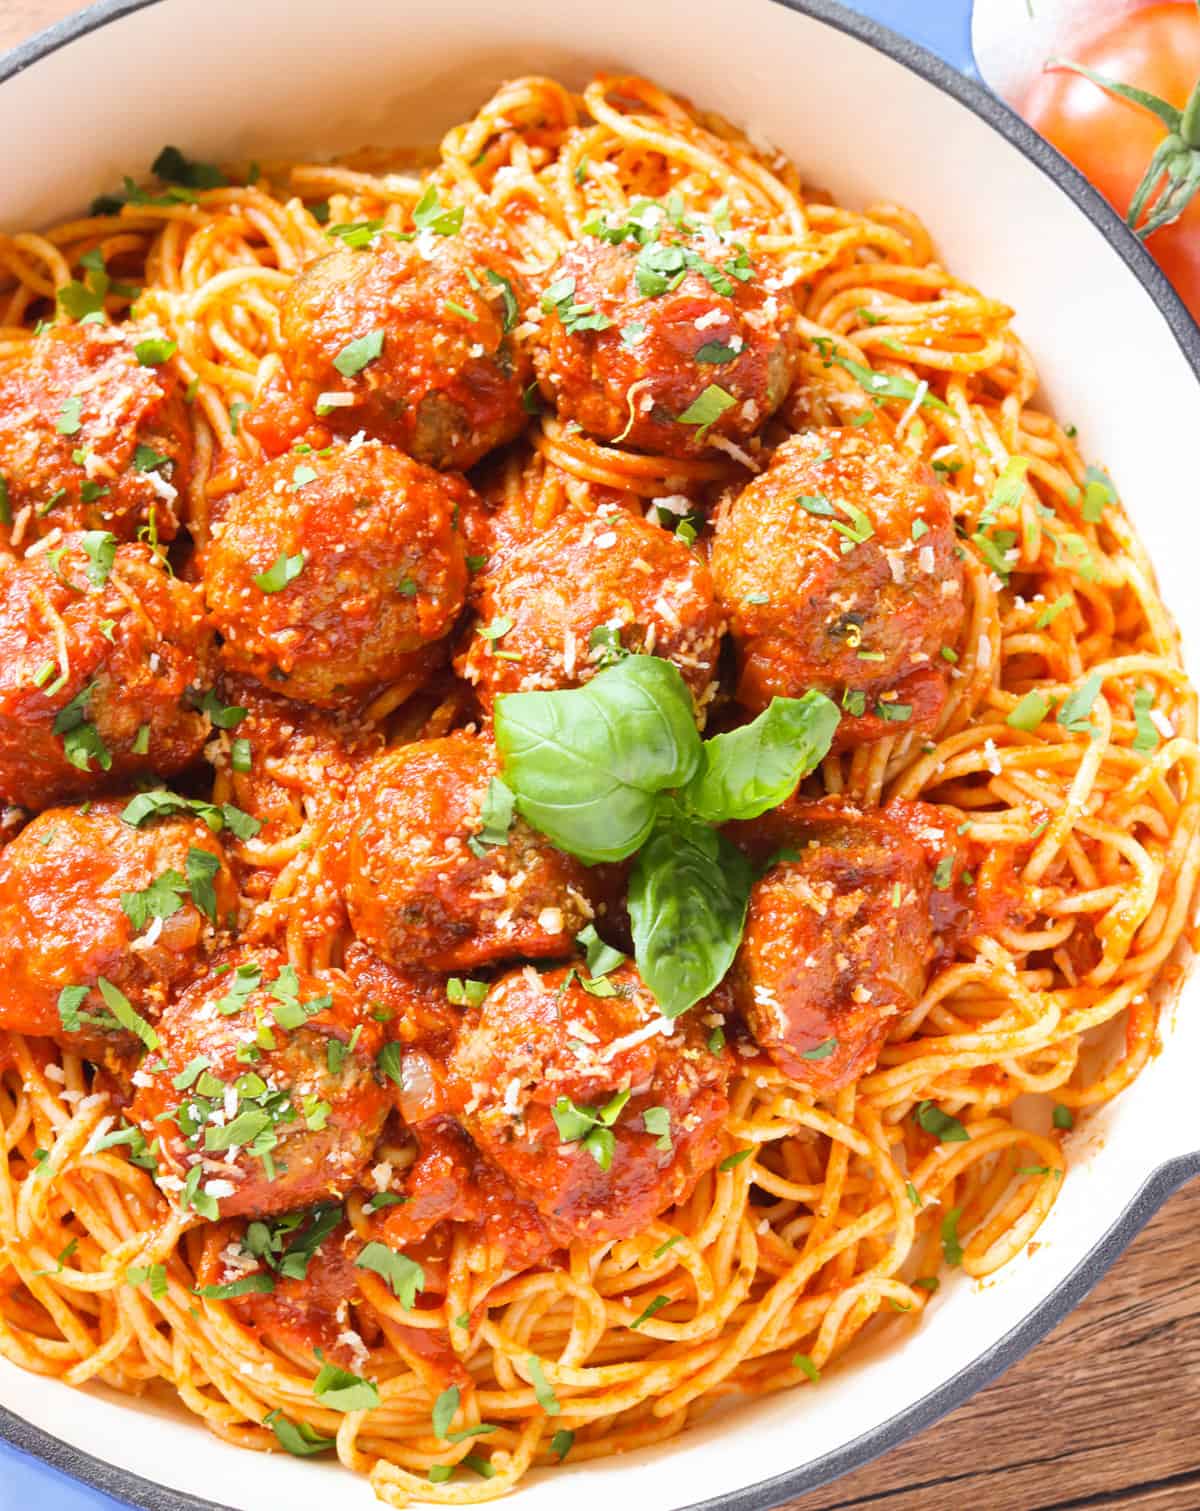 A top view of a bowl of spaghetti and meatballs